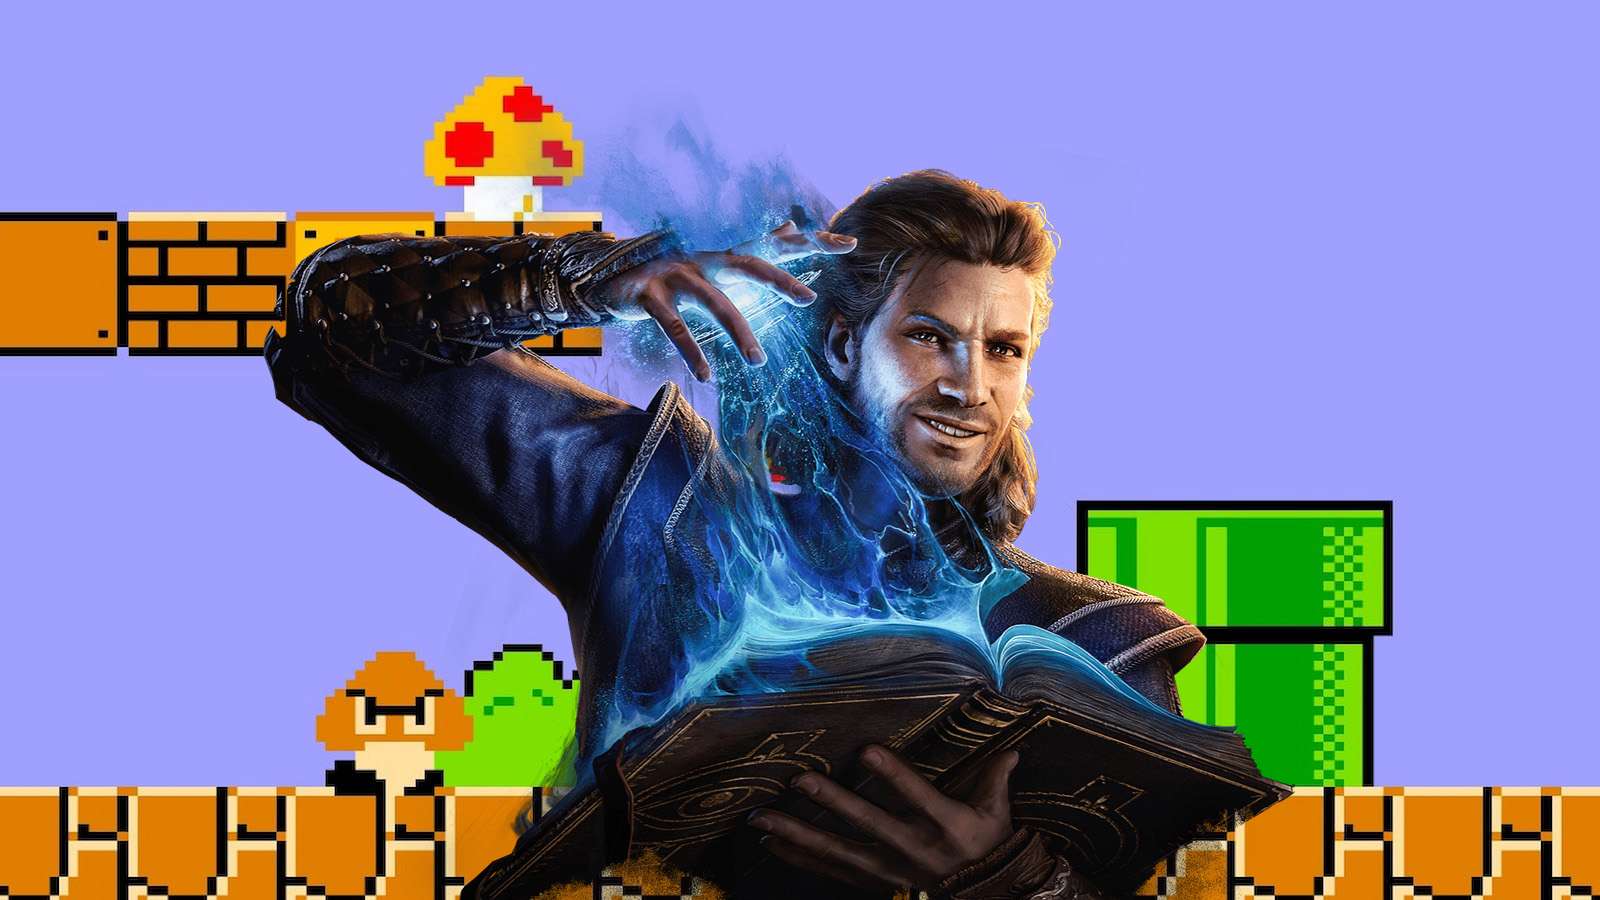 Gale from Baldur's Gate 3 in front of World 1-1 from Super Mario Bros.